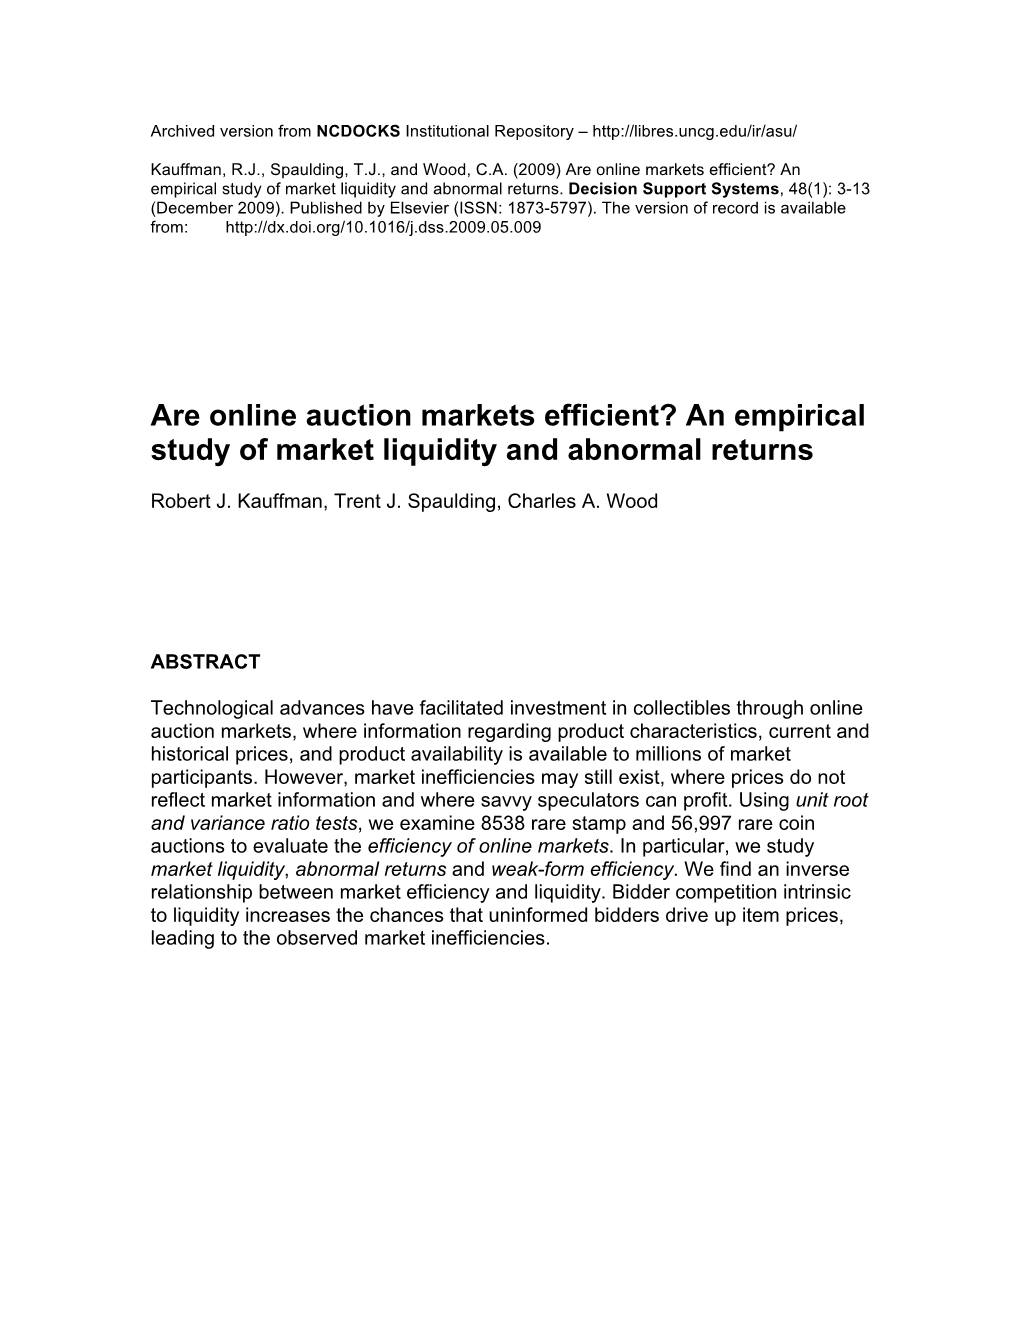 Are Online Auction Markets Efficient? an Empirical Study of Market Liquidity and Abnormal Returns